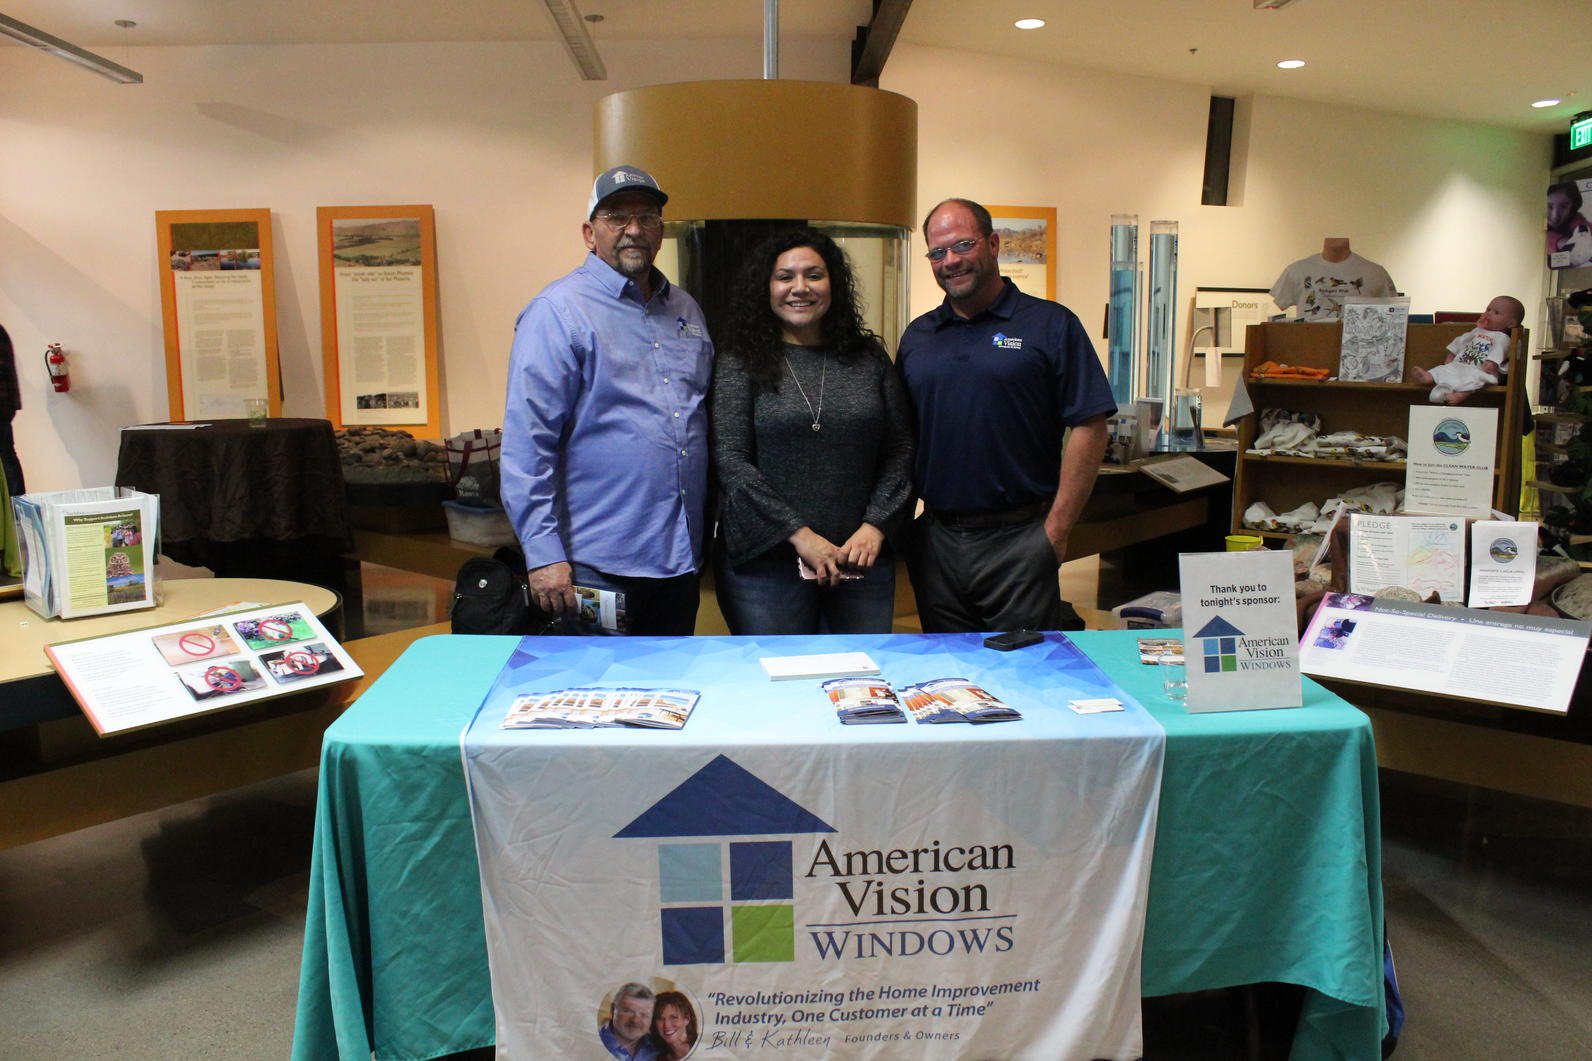 Our sponsors from American Vision Windows stand in front of their table at the end of the night.